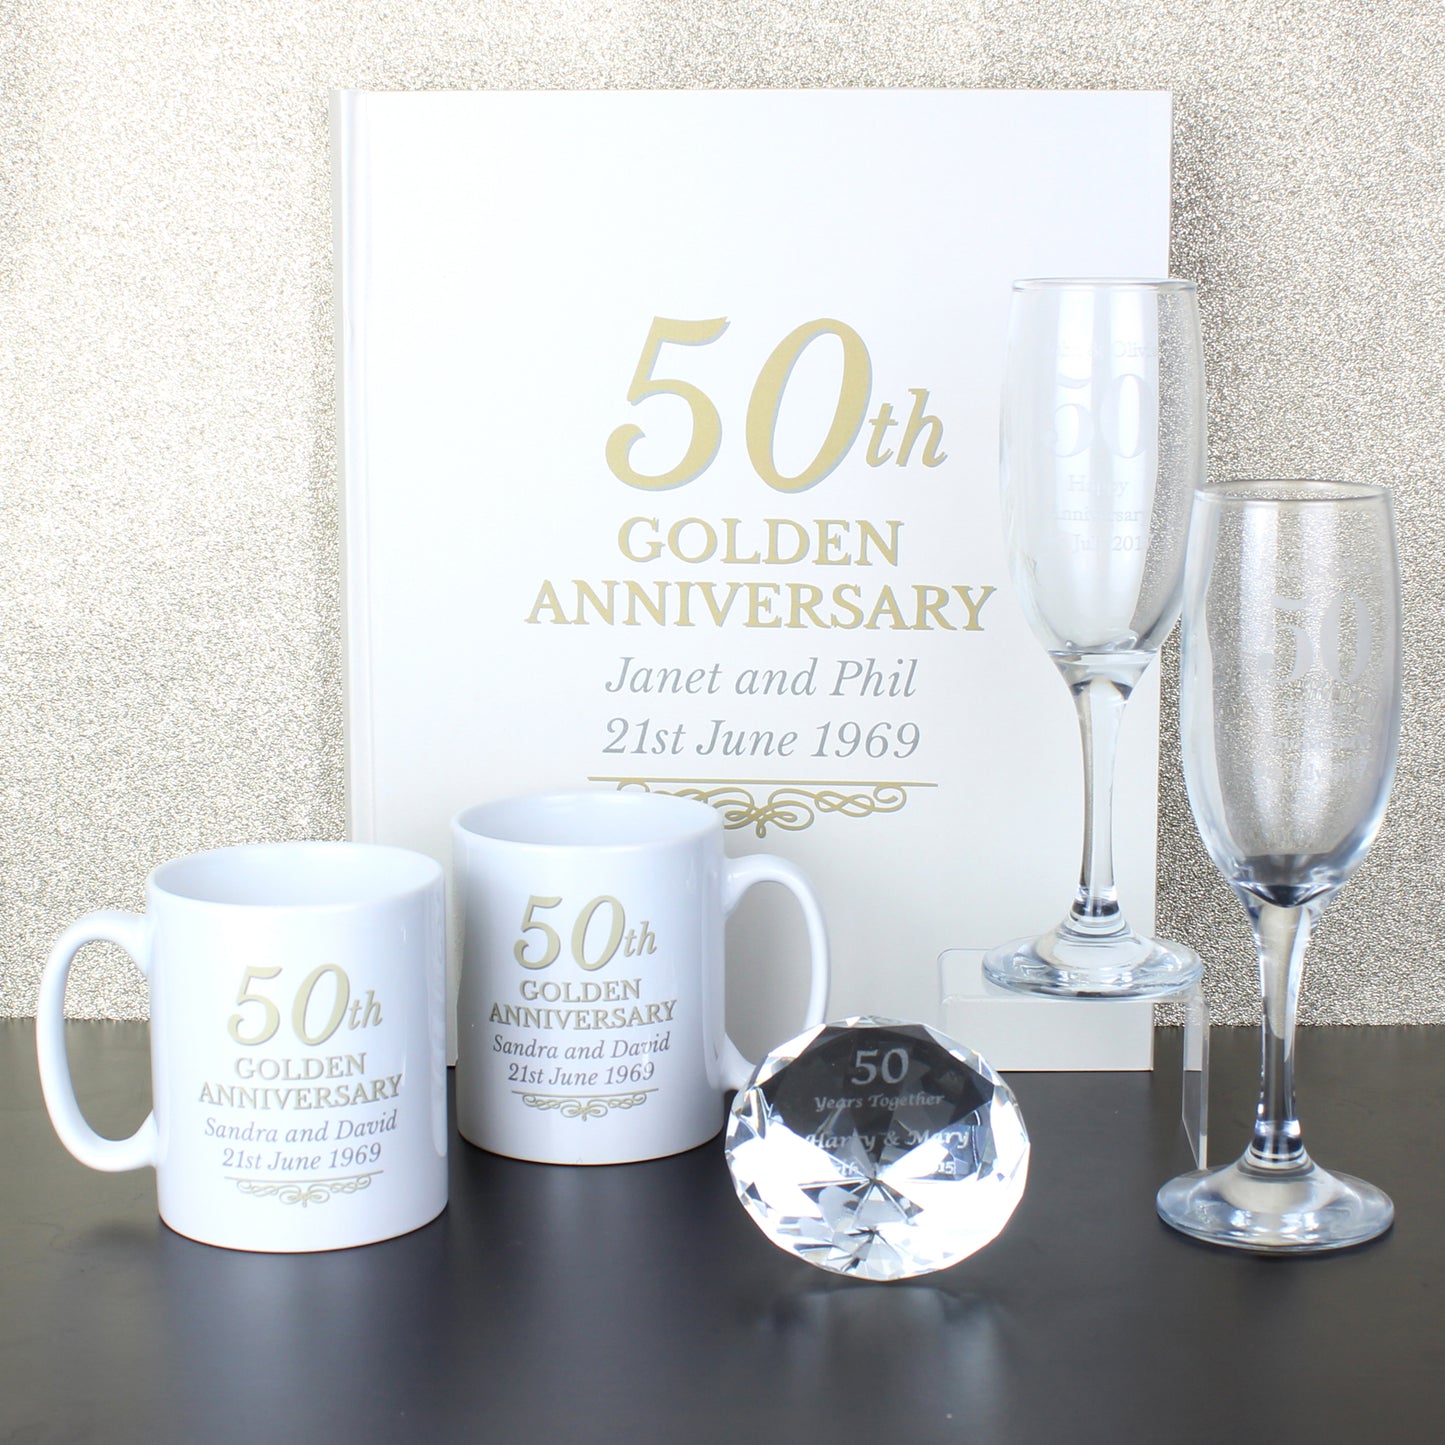 Personalised 50th Golden Anniversary Traditional Album - Personalise It!